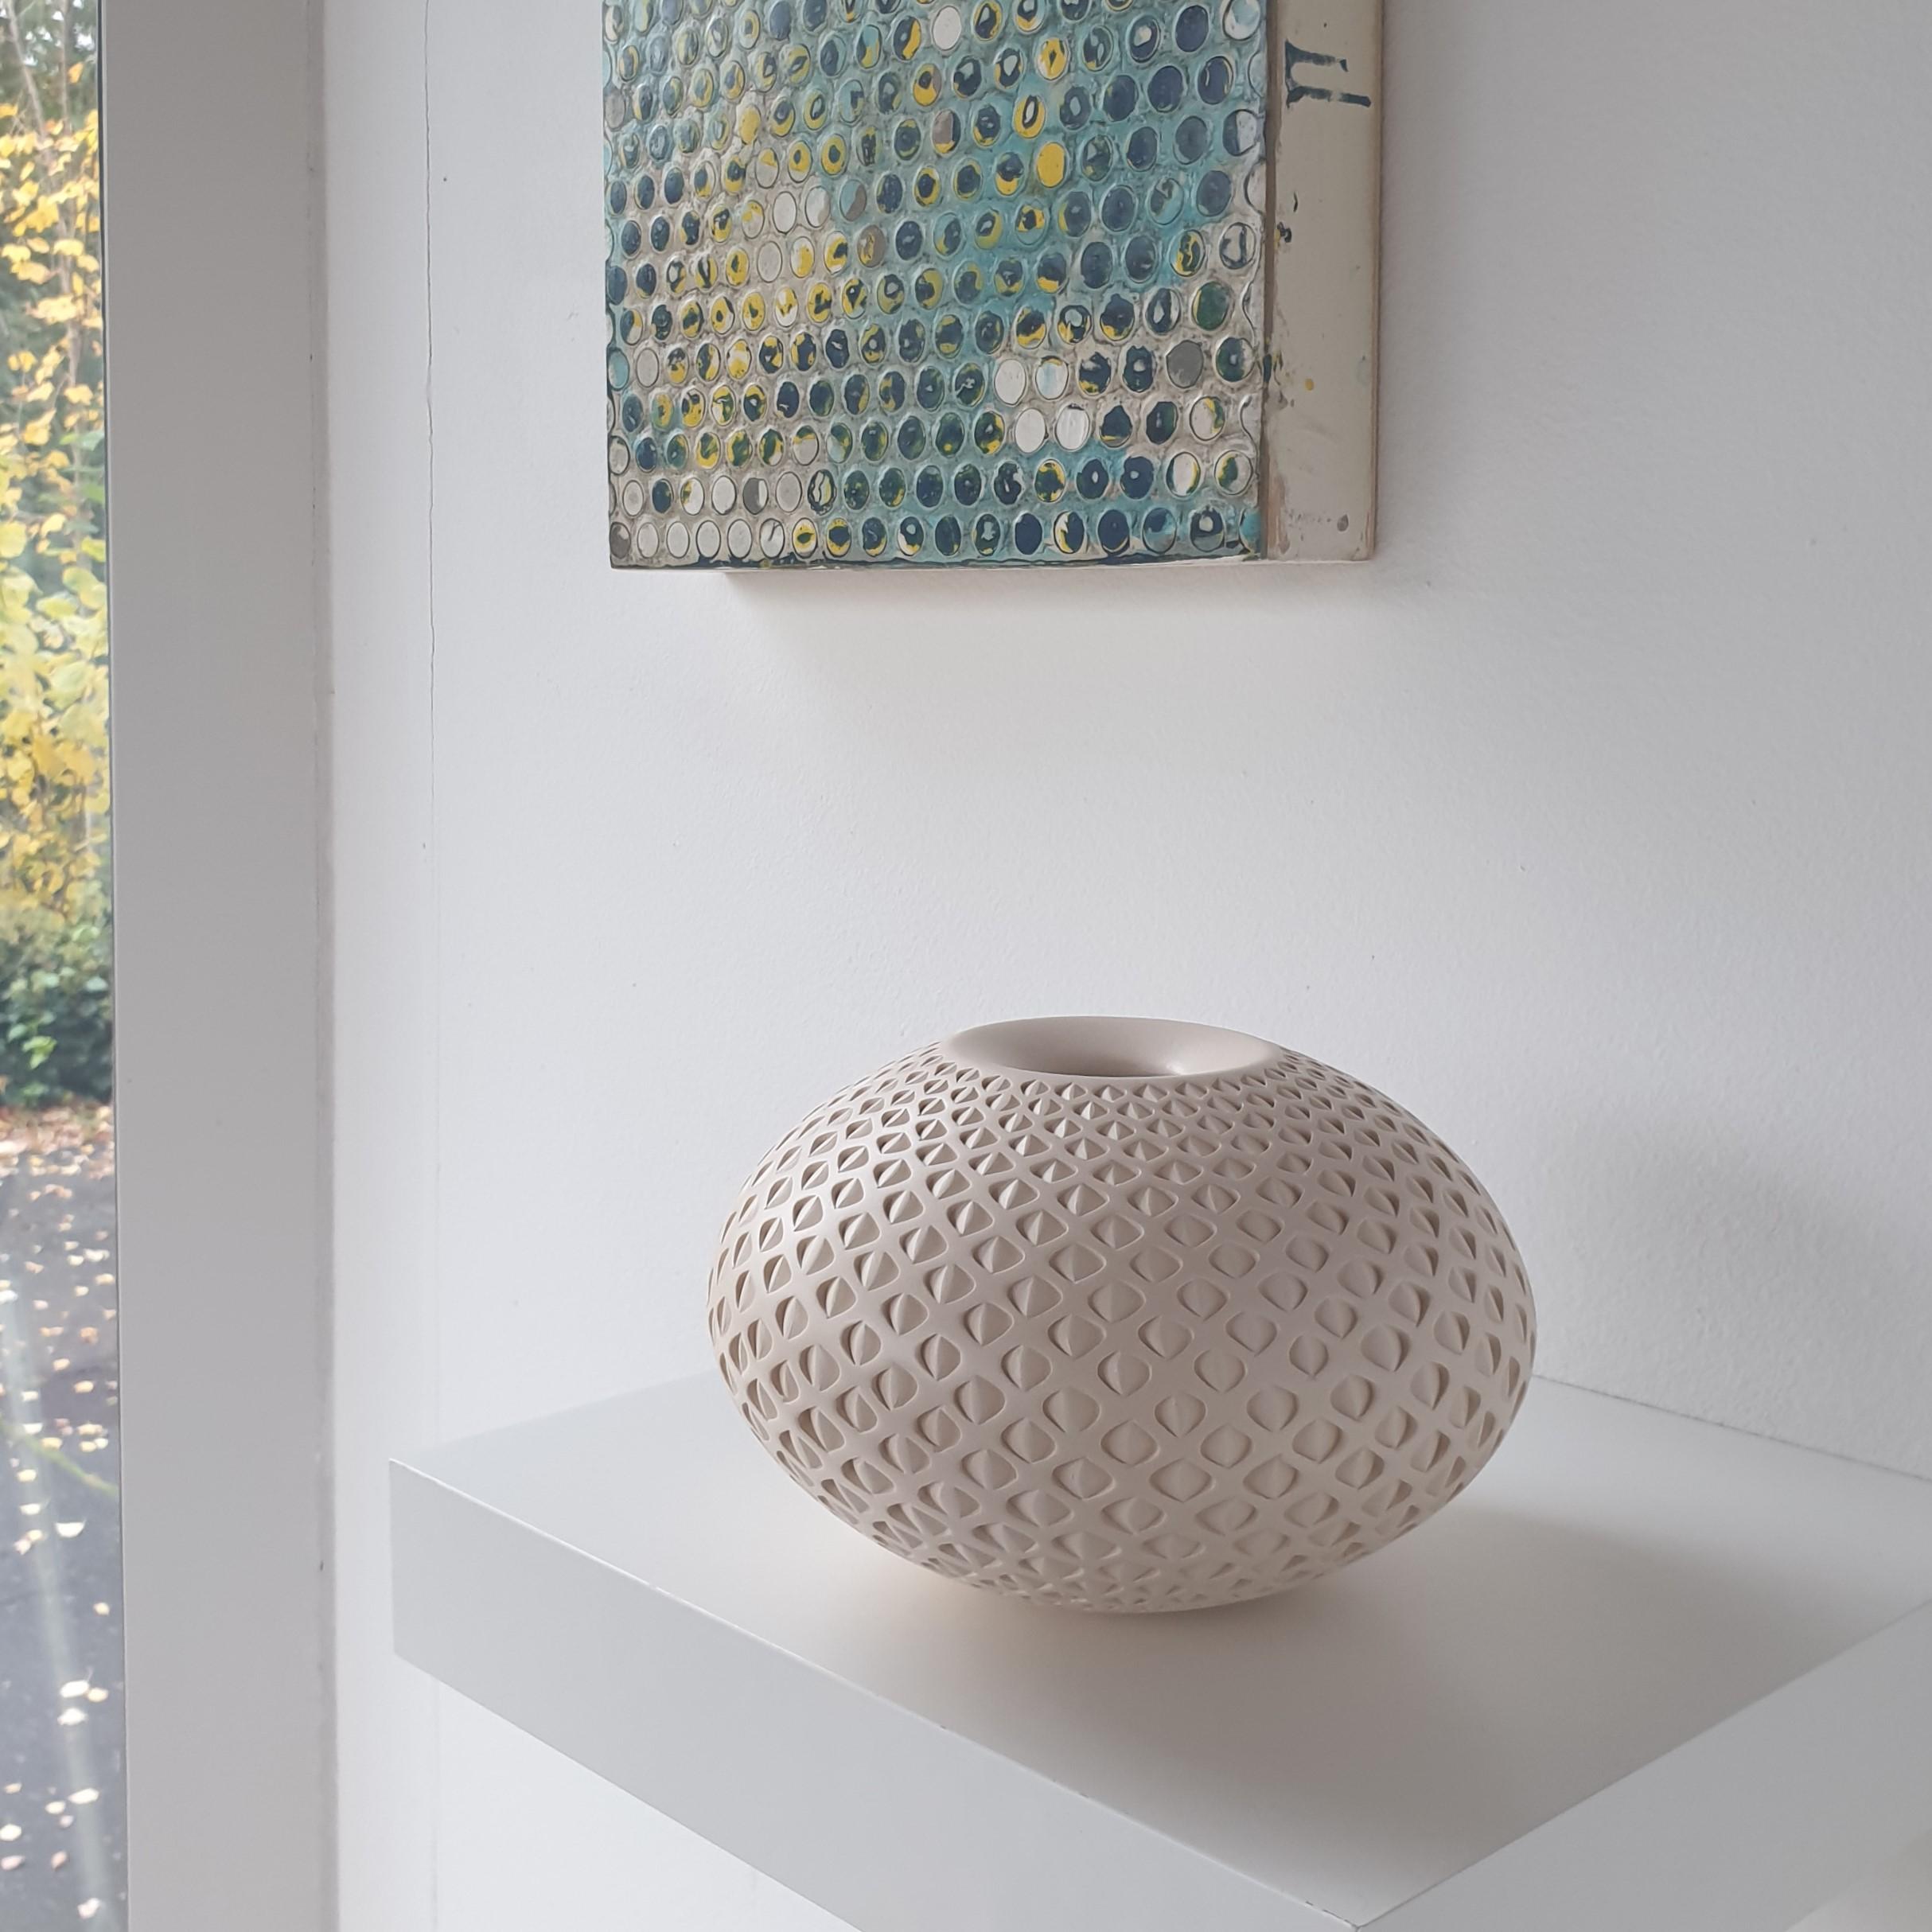 Oval Eye Vessel - contemporary modern abstract geometric ceramic vase vessel - Contemporary Art by Michael Wisner